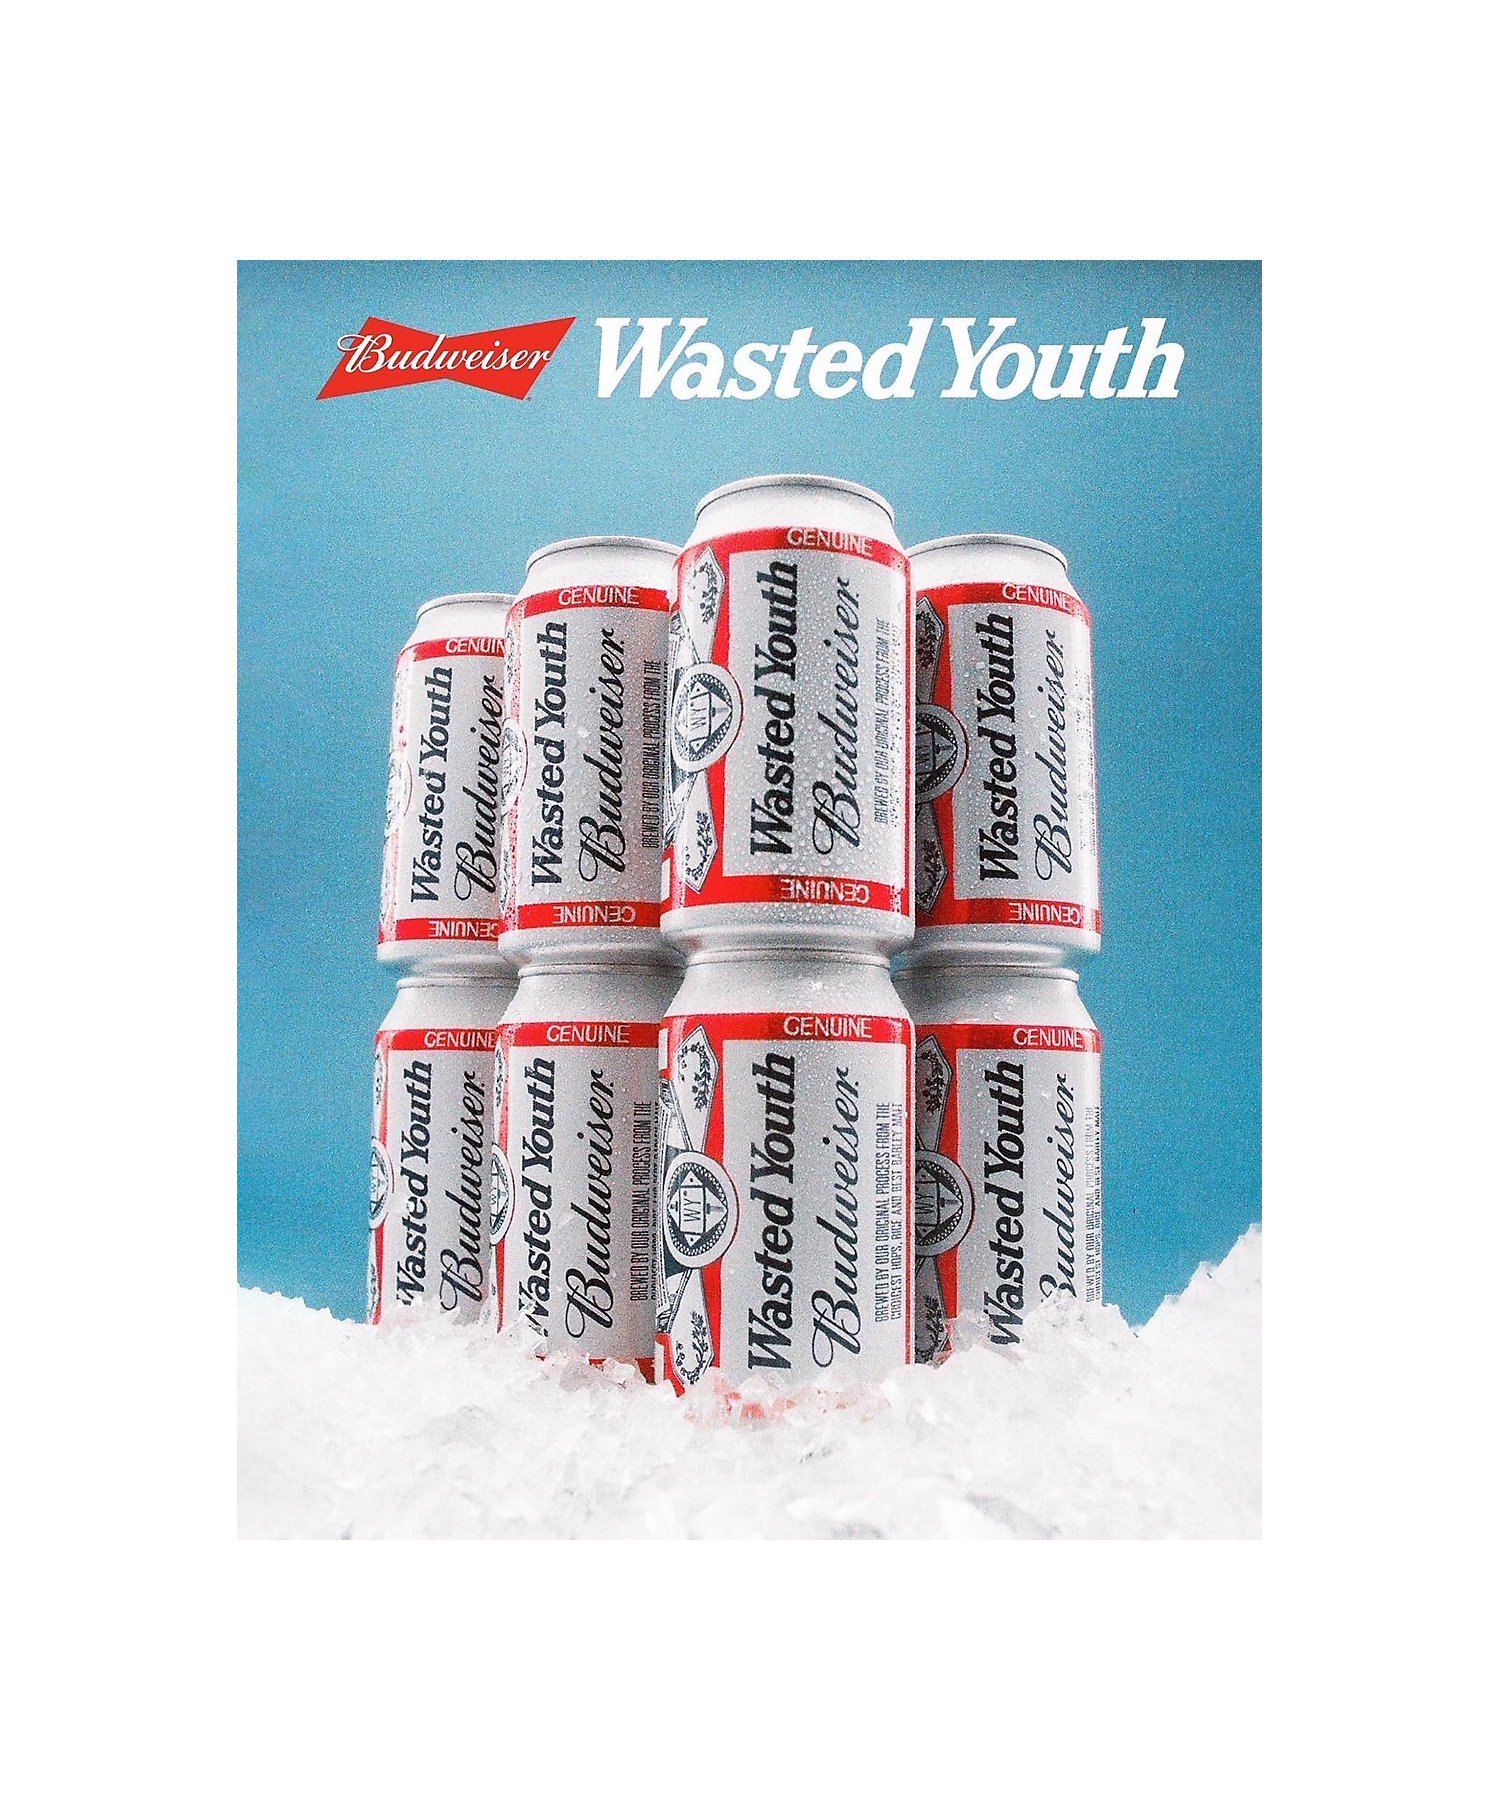 VERDY Wasted Youth × Budweiser 限定デザイン ボックス